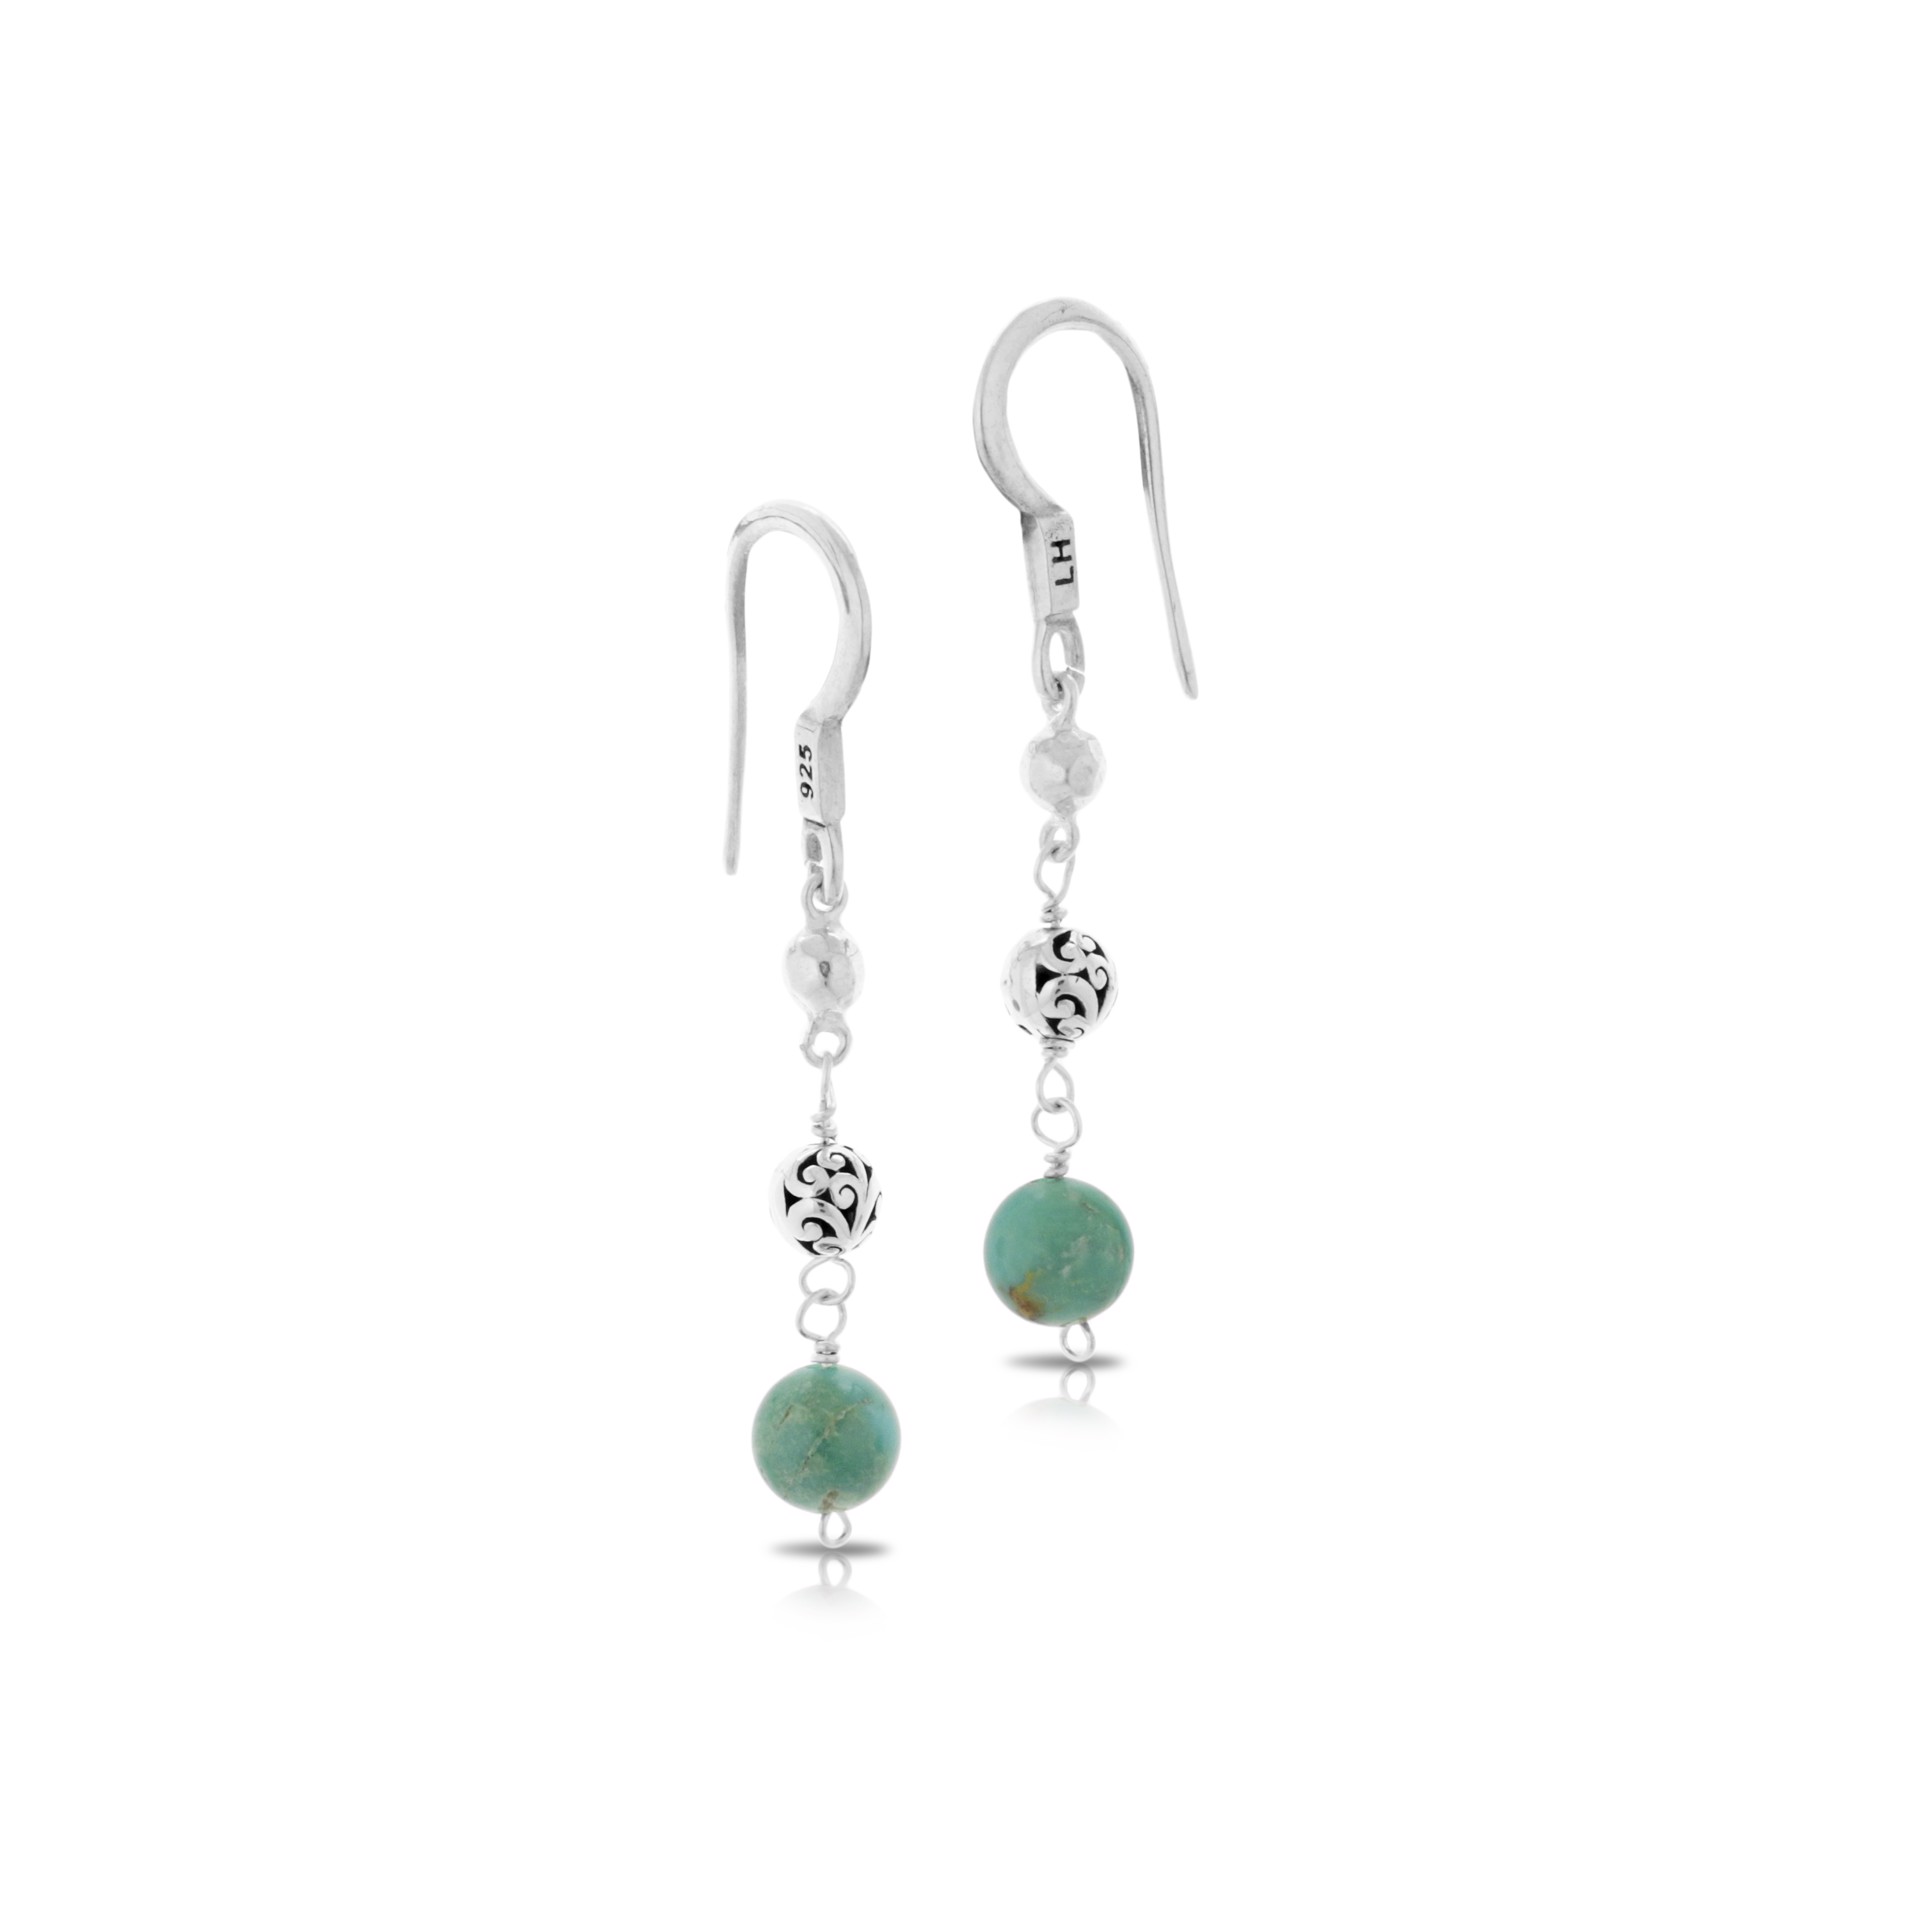 9698 Blue Turquoise and Scroll Beads Linear Drop Earrings by Lois Hill